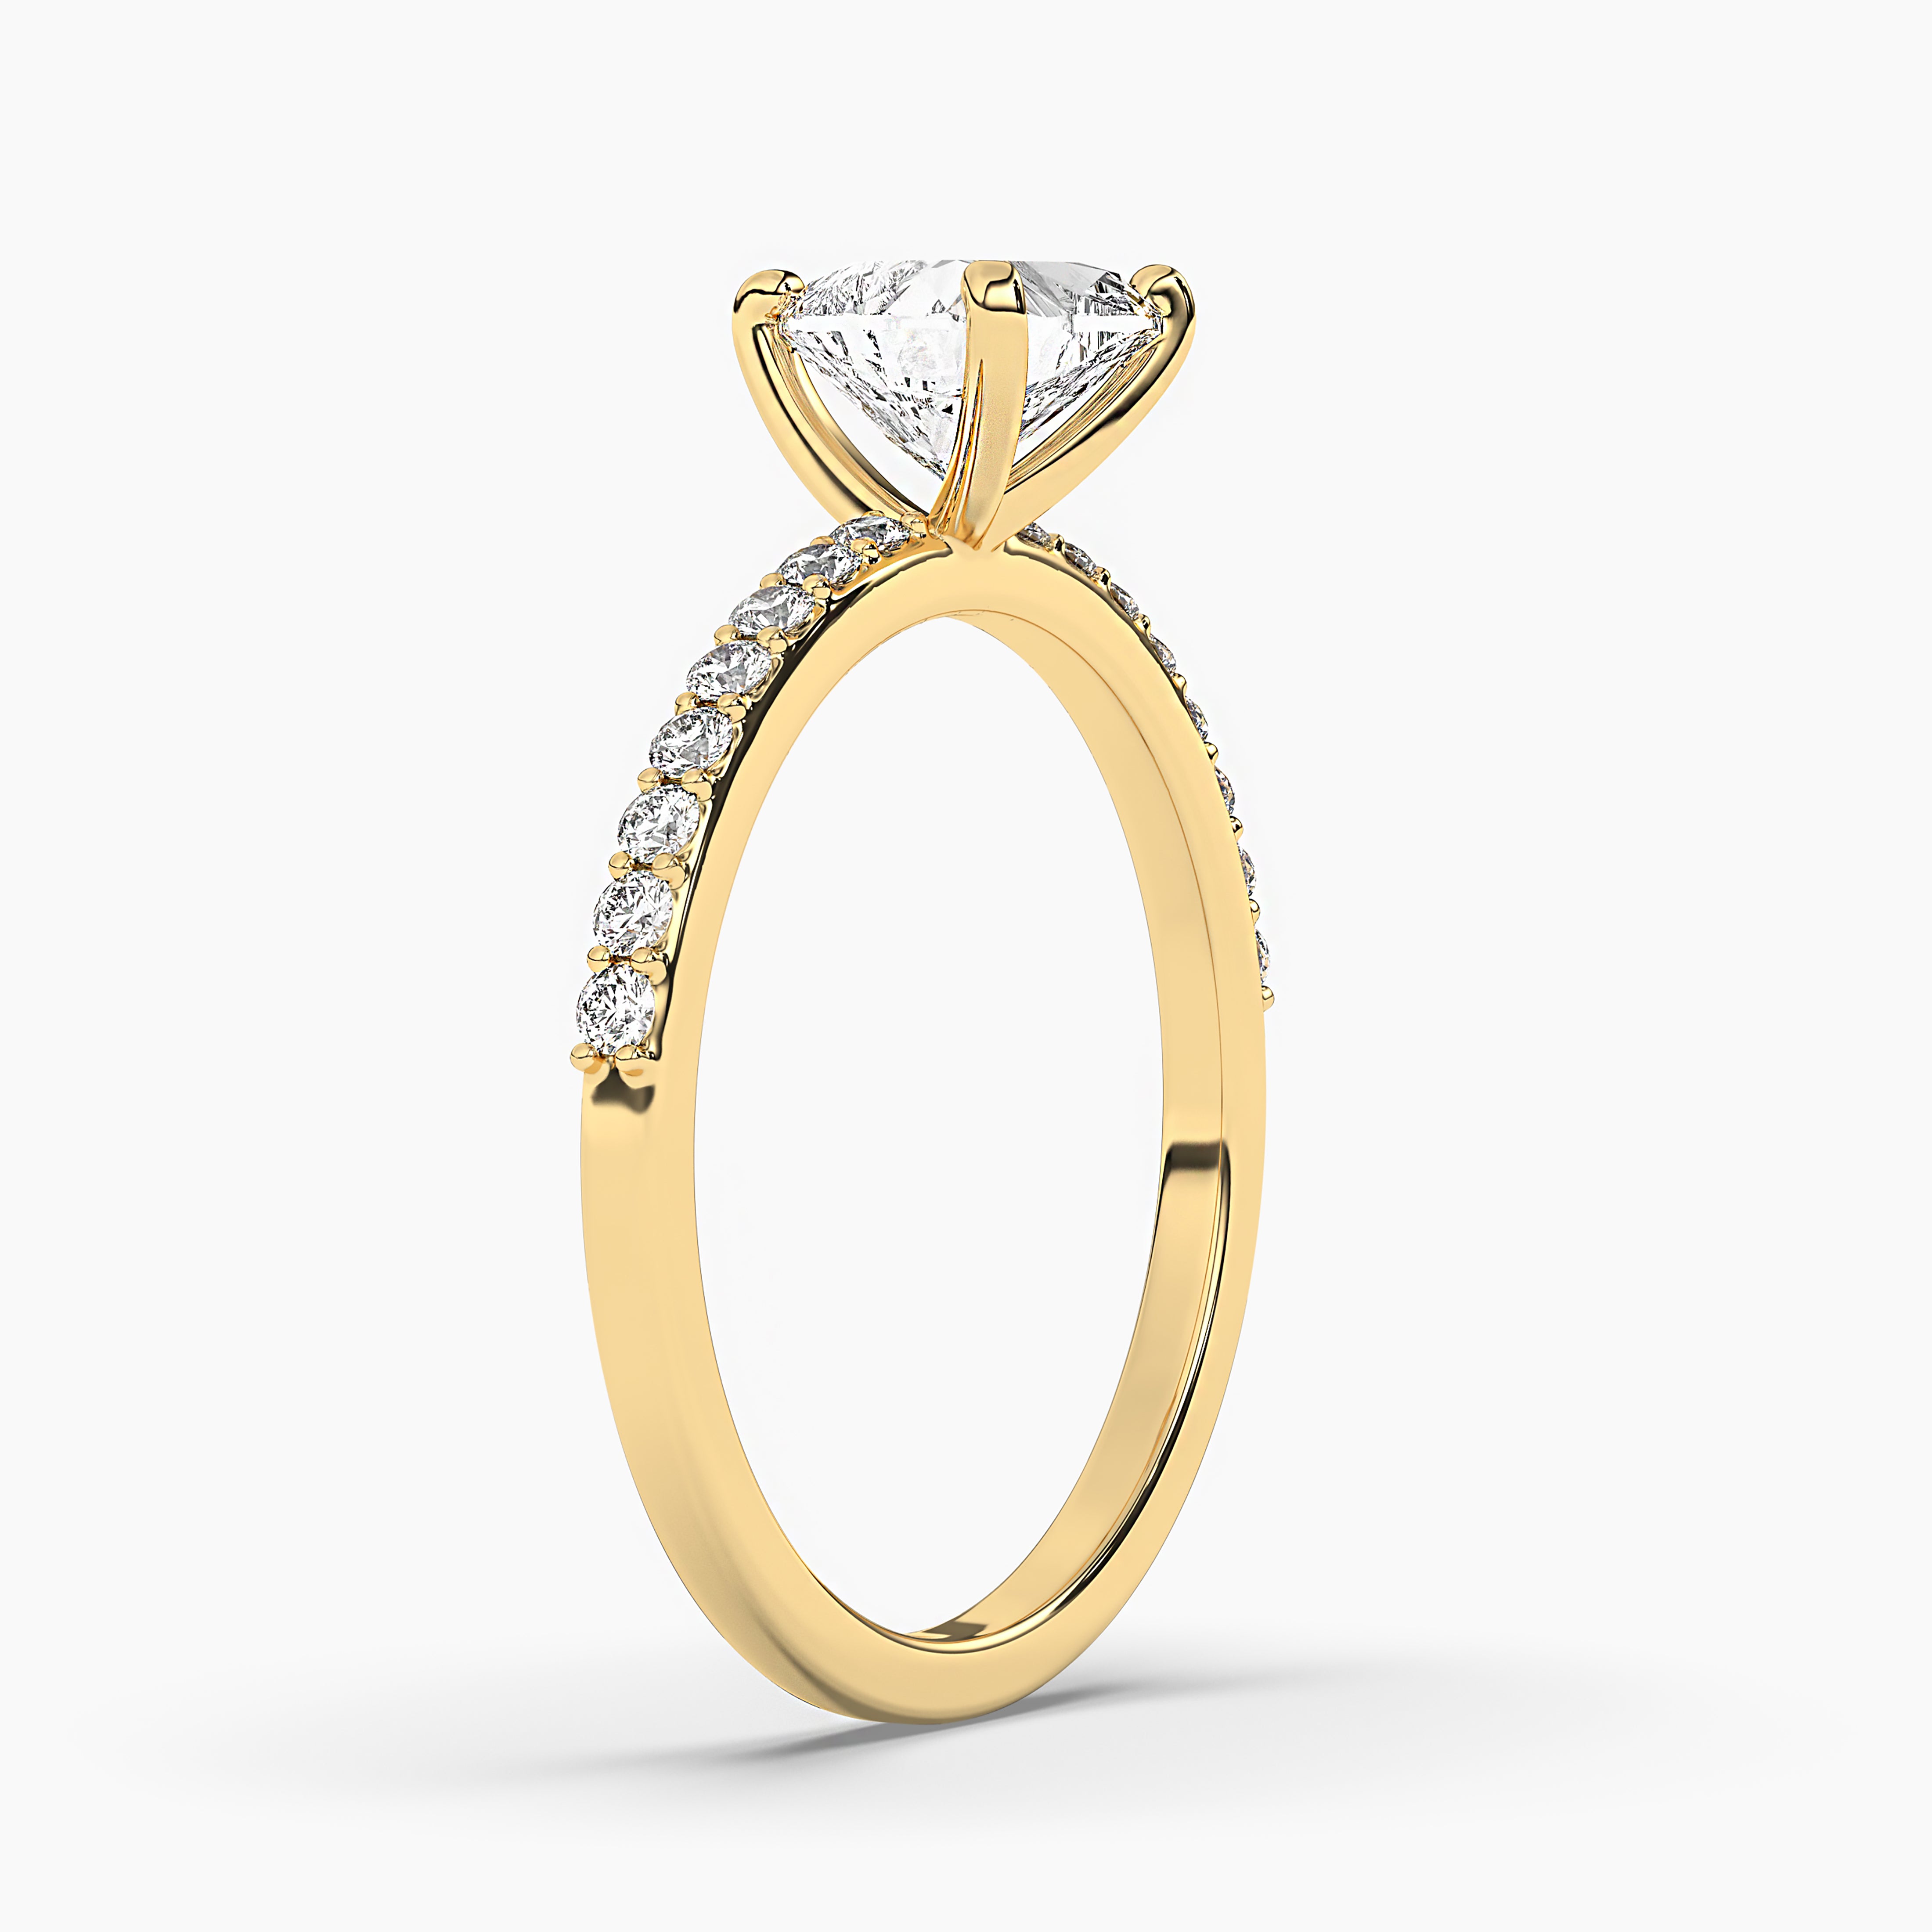 HEART SHAPED DIAMOND ENGAGEMENT RING IN YELLOW  GOLD